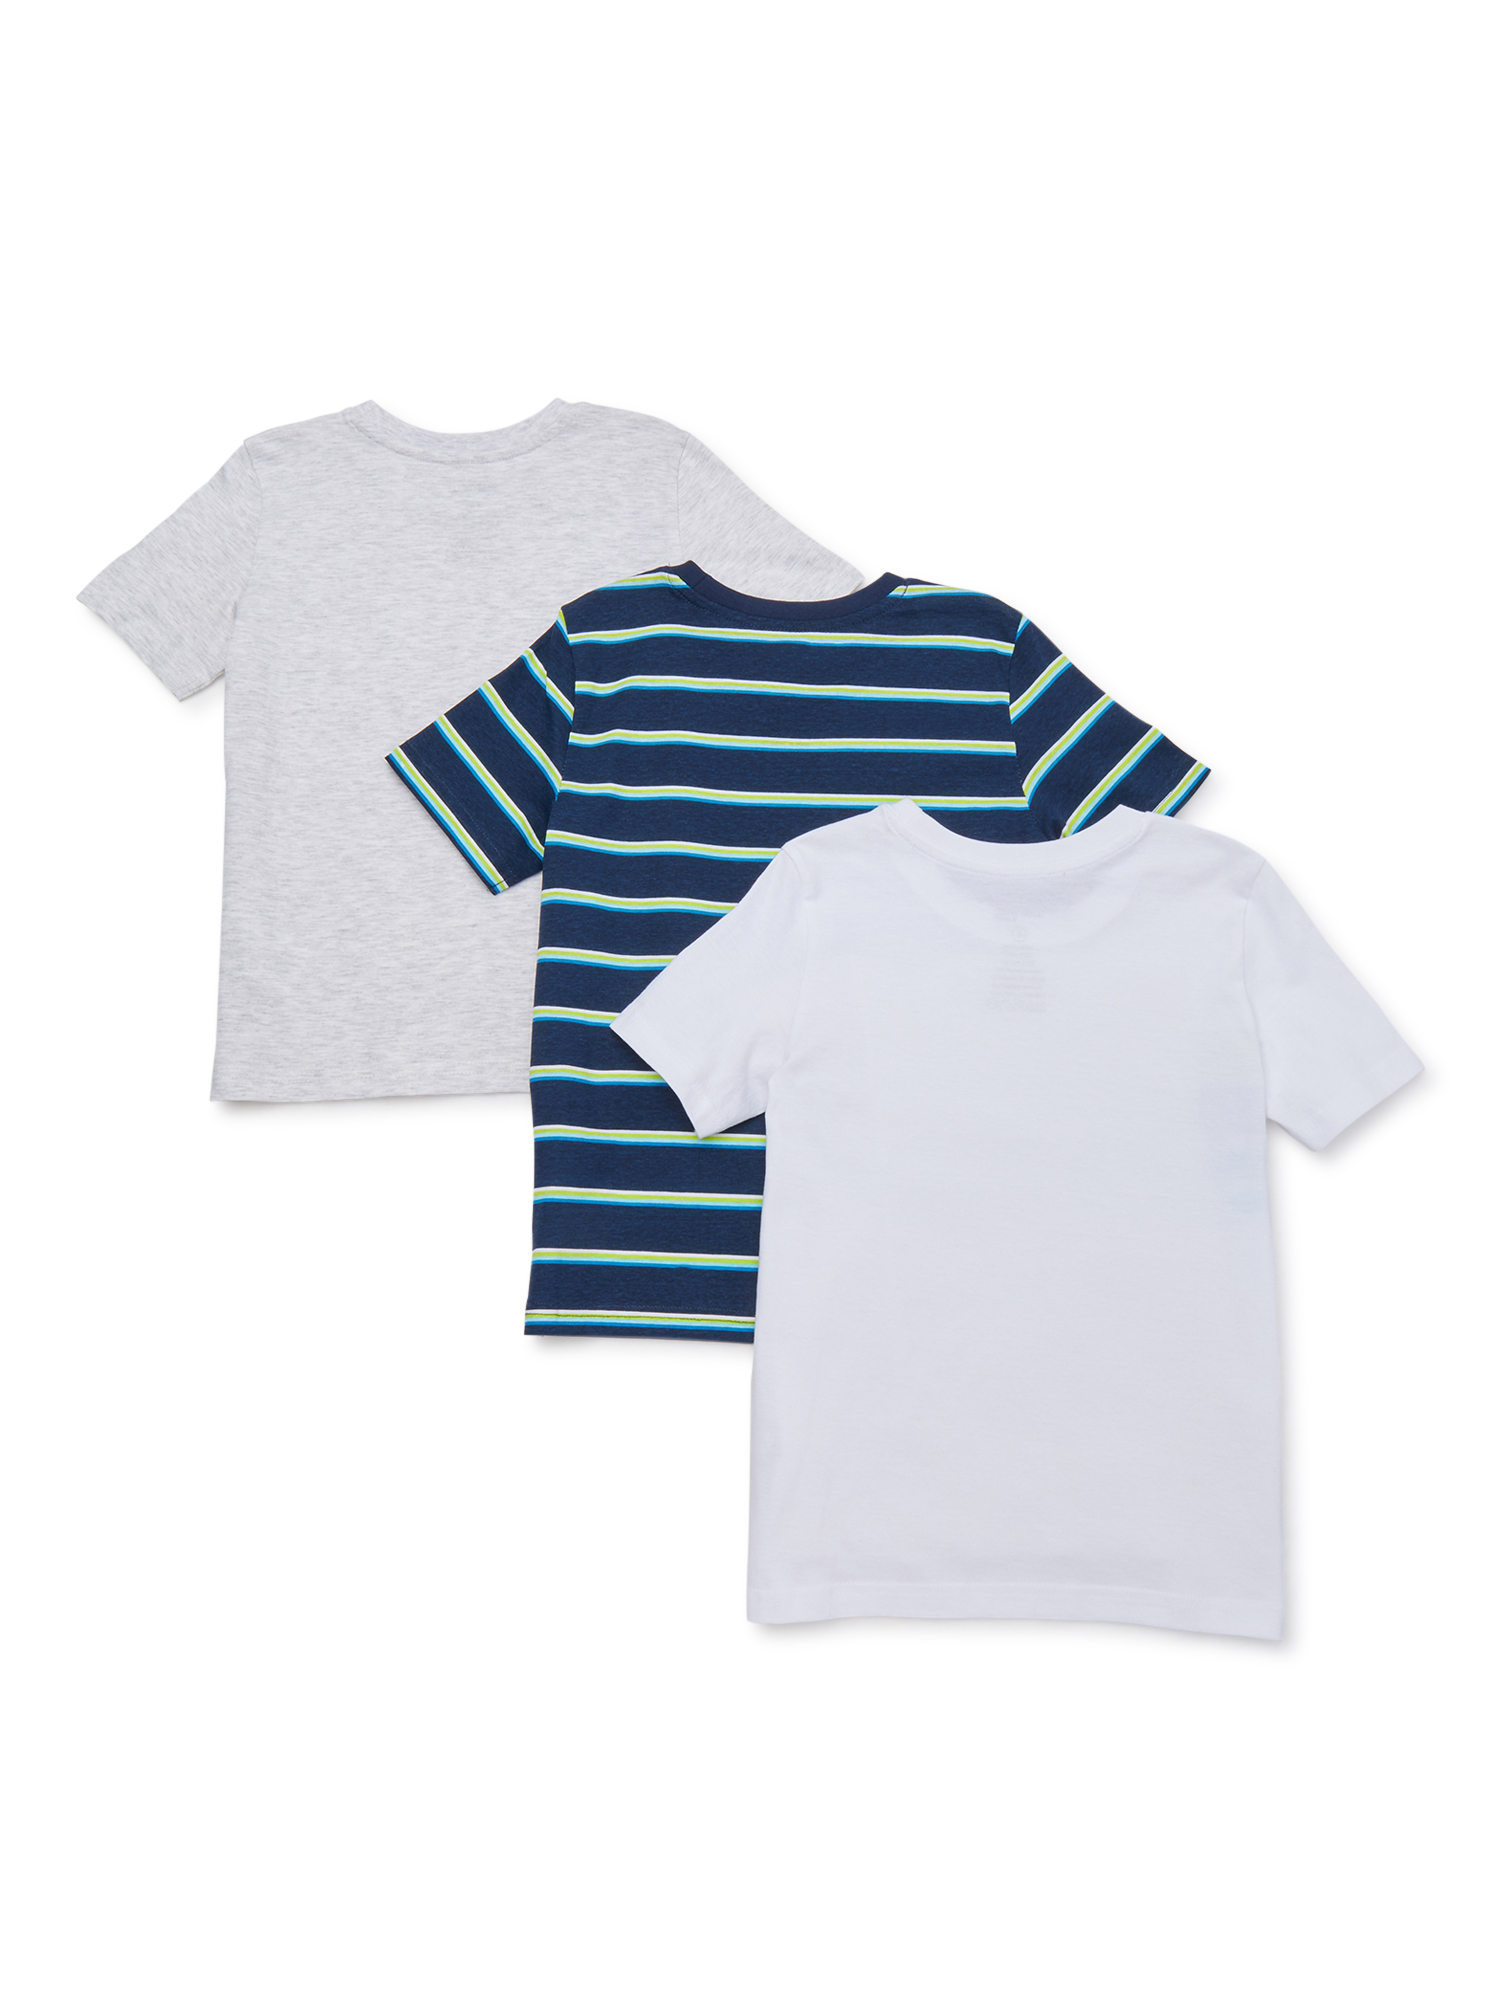 Hollywood Boys Stripe & Solid Short Sleeve T-Shirt 3 Pack Sizes 4-18 - image 3 of 3